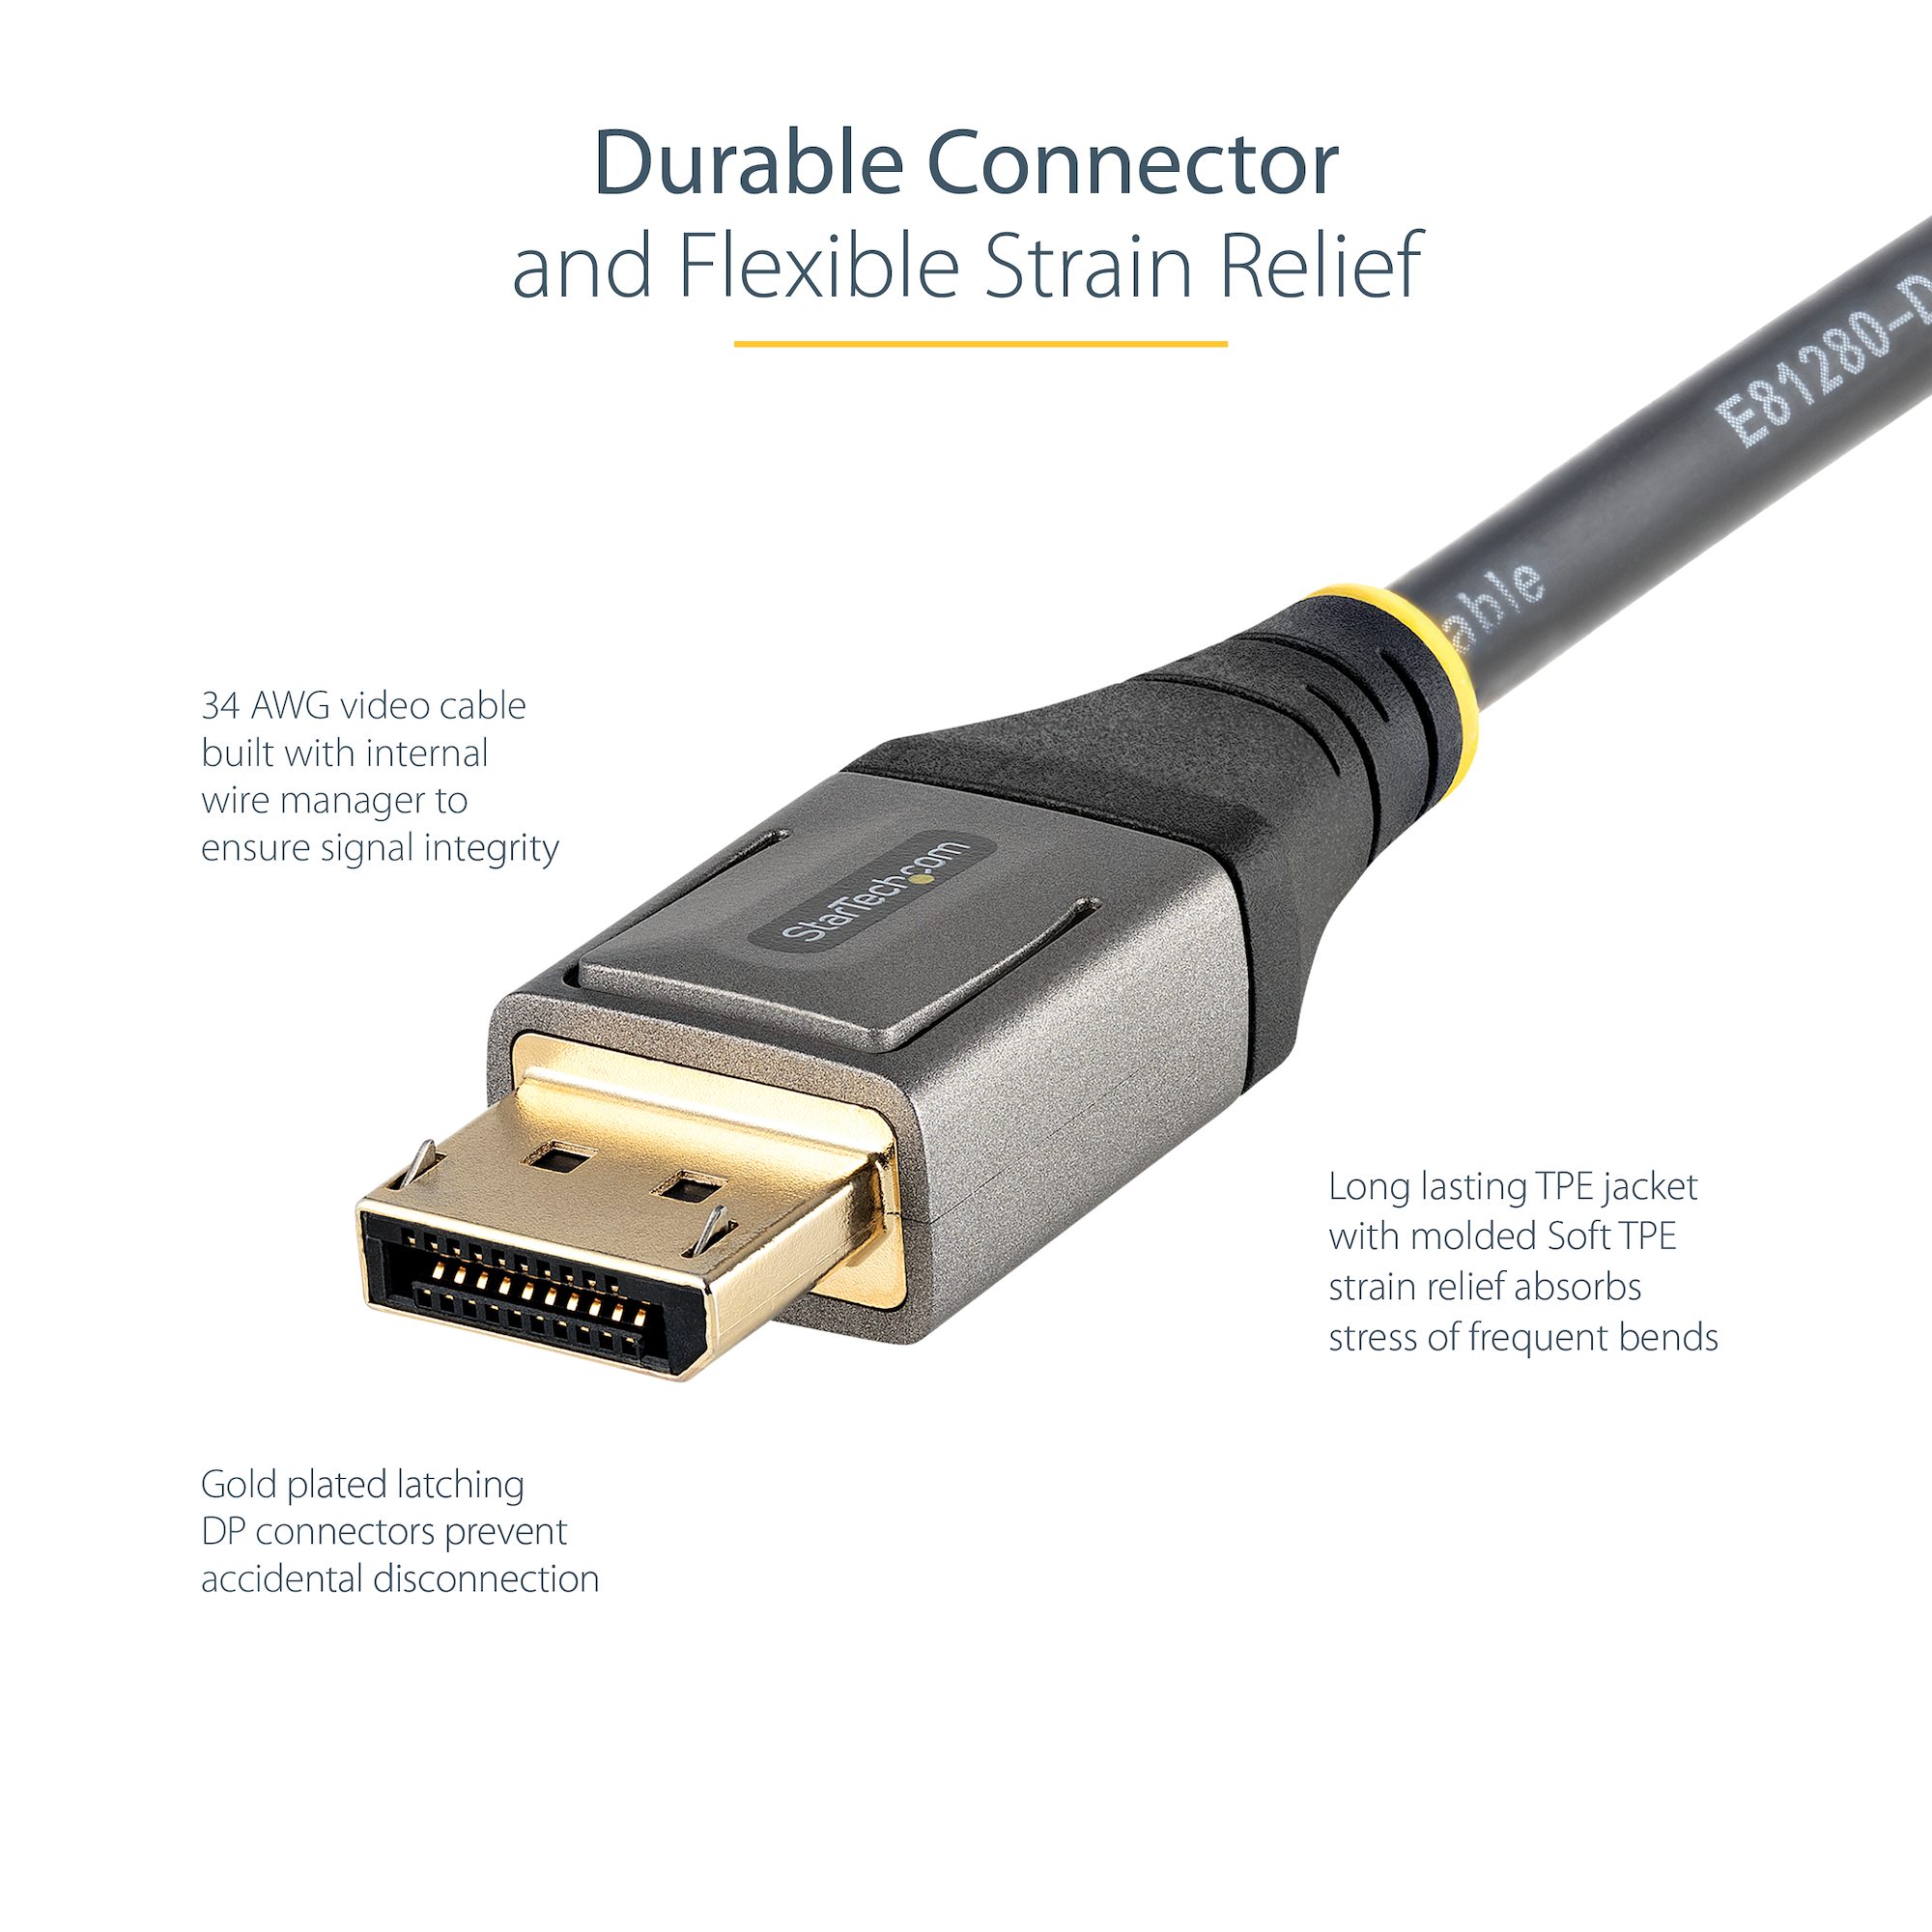 Buy Wholesale China Hot Selling Displayport Cable 1.4 8k Dp 1.4 Adapter  Cable @165hz & Cable at USD 3.7